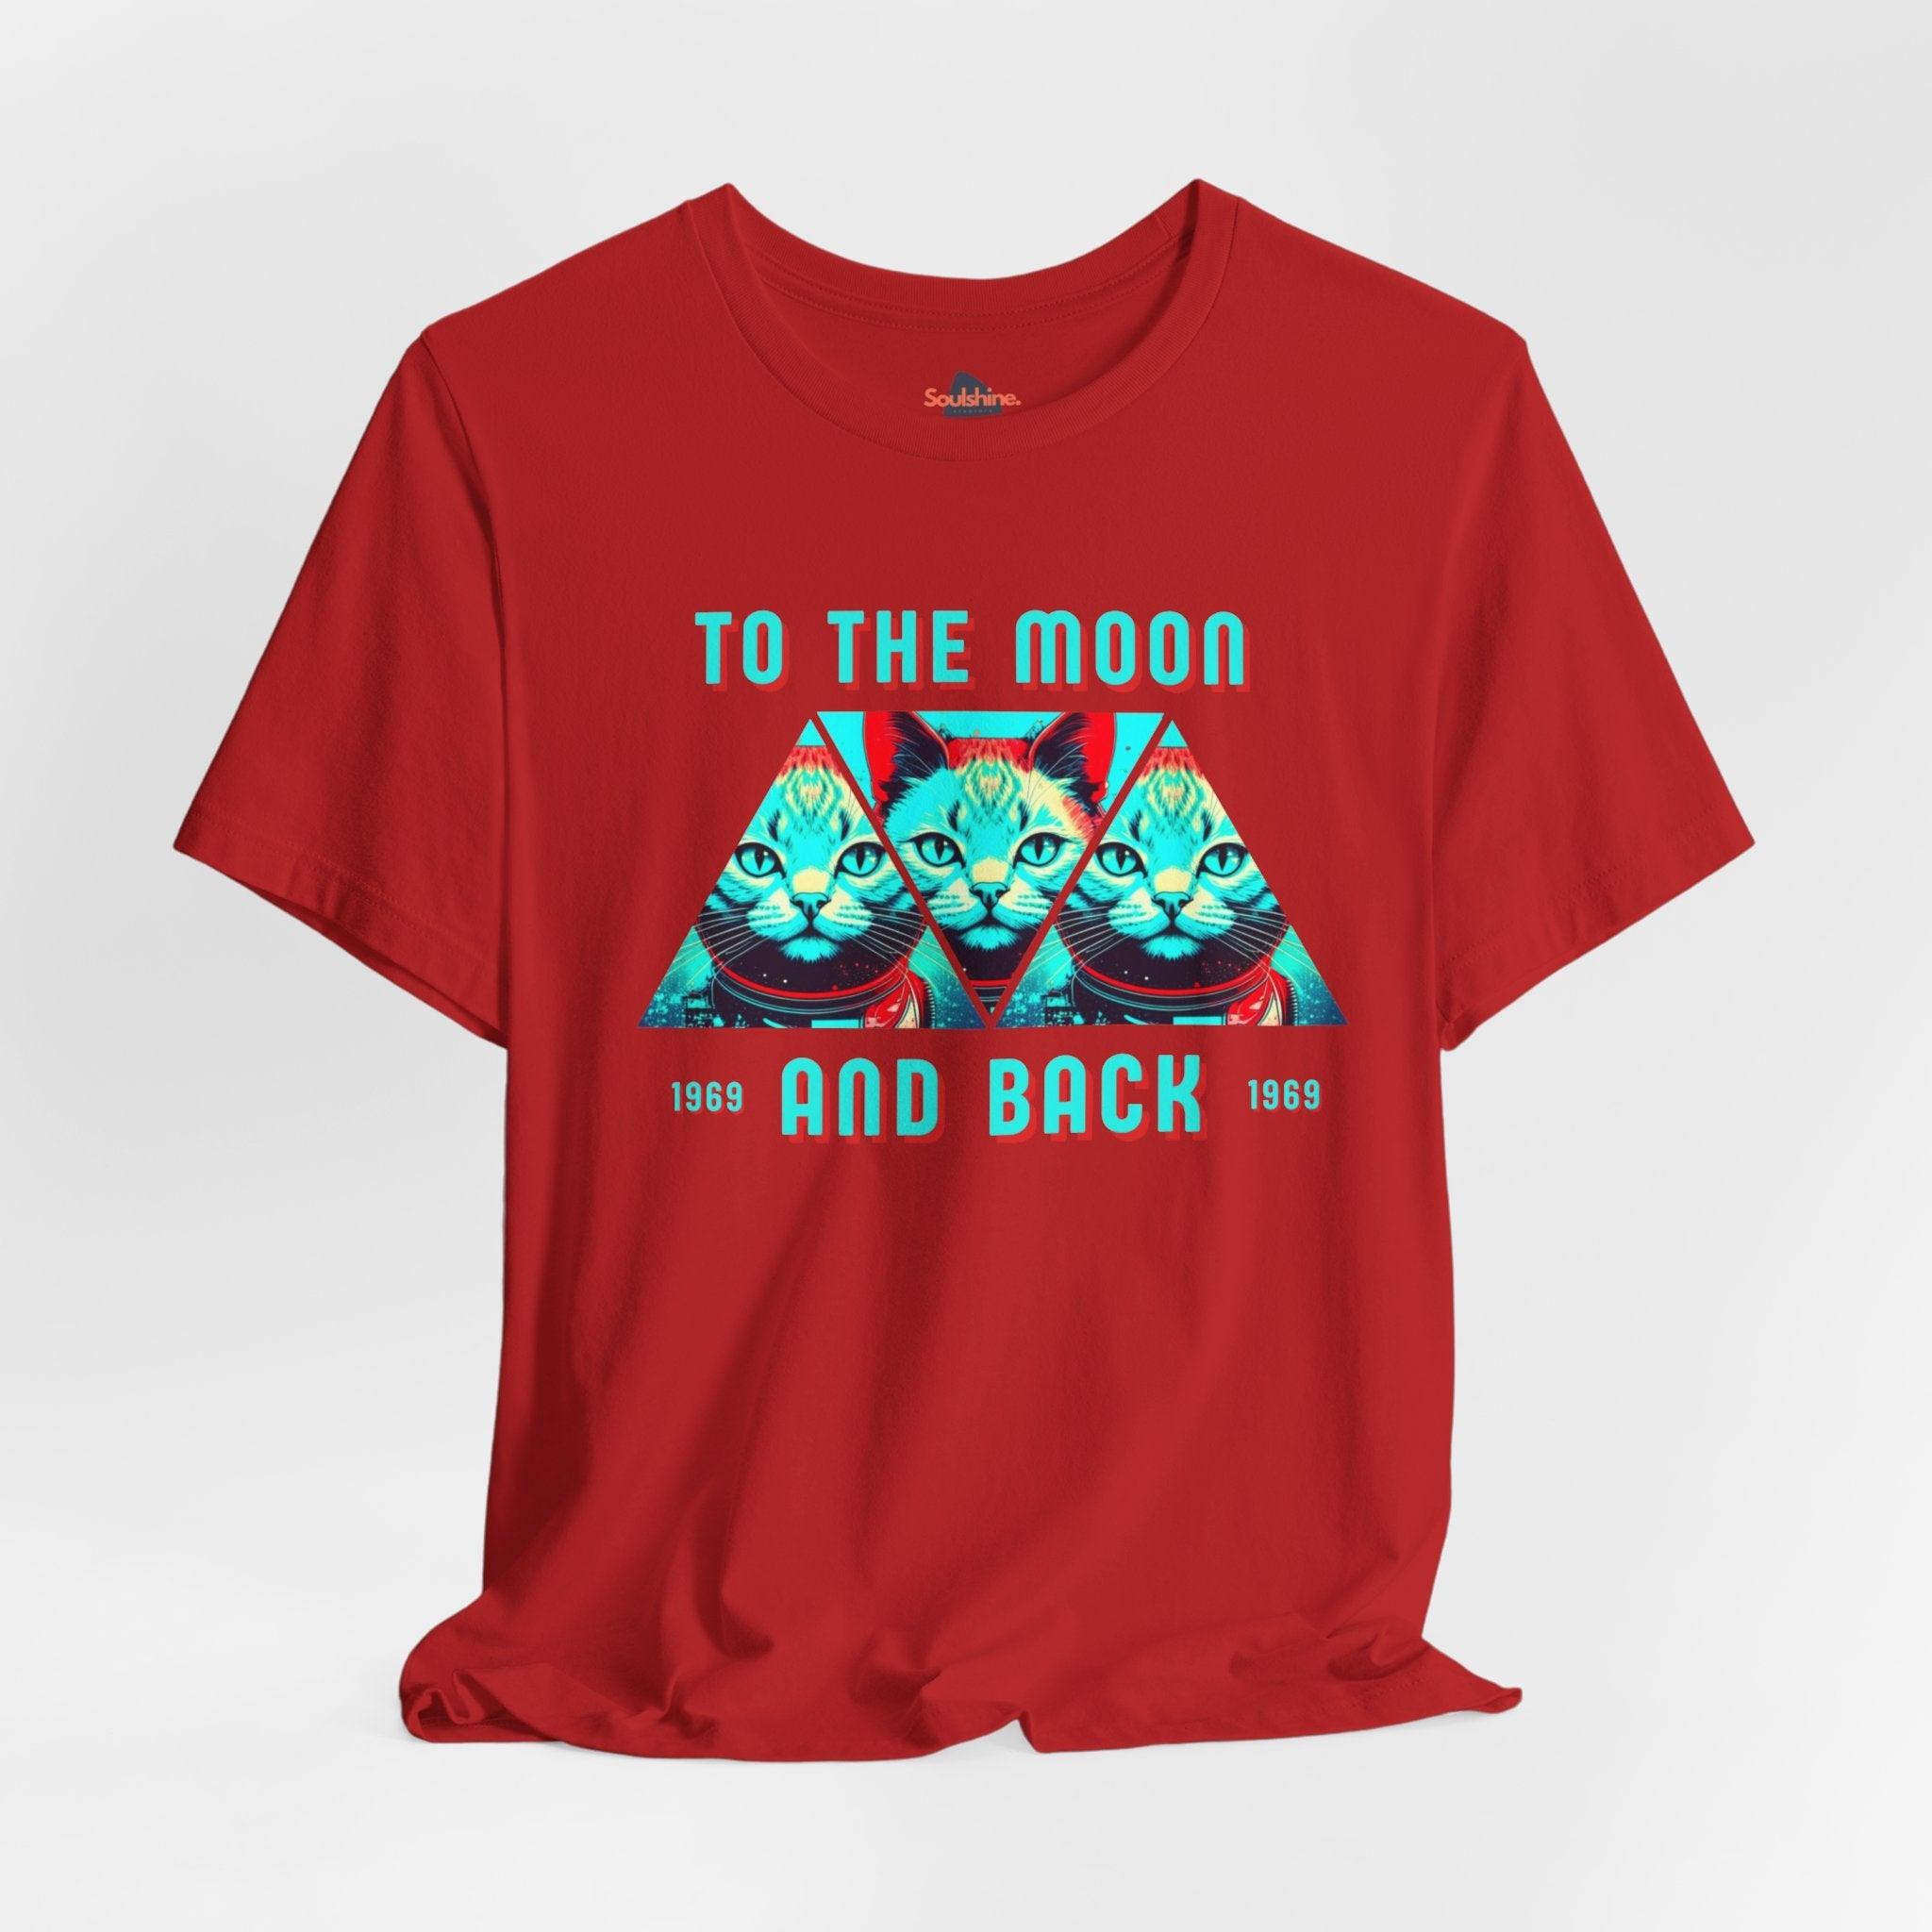 To the moon and back - Soulshinecreators - Unisex Jersey Short Sleeve Tee - US Red S T-Shirt by Soulshinecreators | Soulshinecreators